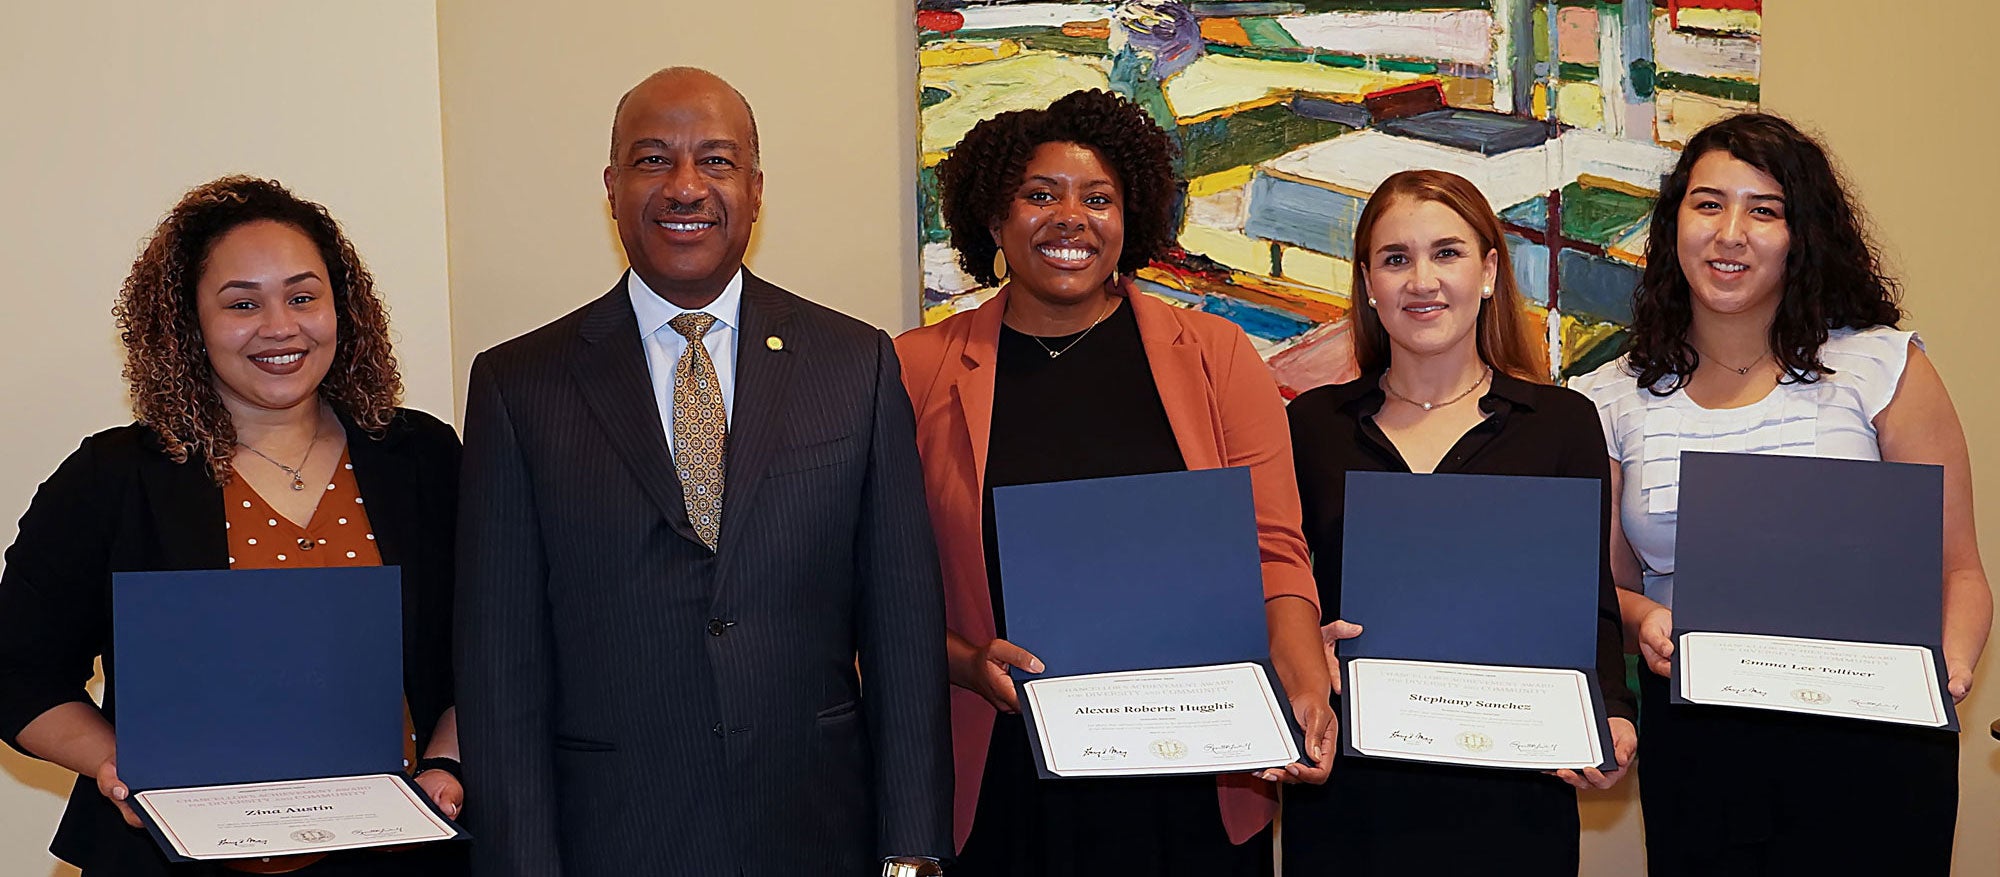 4 award recipients with certificates, posing with Chancellor Gary S. May, UC Davis